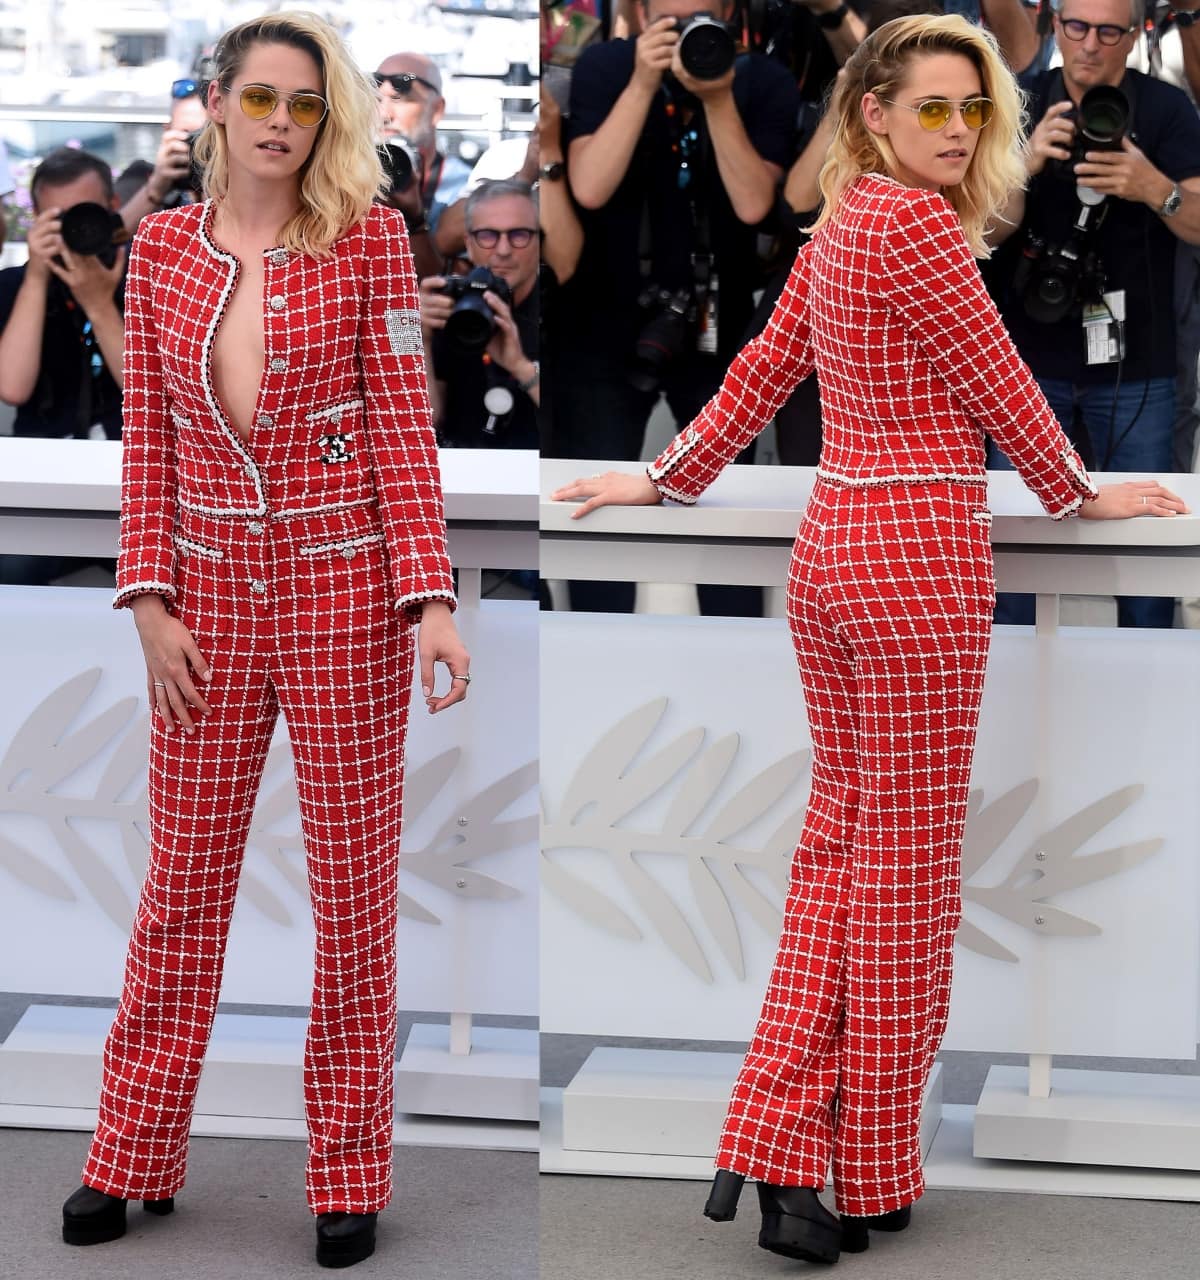 Kristen Stewart in a Chanel Resort 2023 tweed jumpsuit at the "Crimes of the Future" Photocall